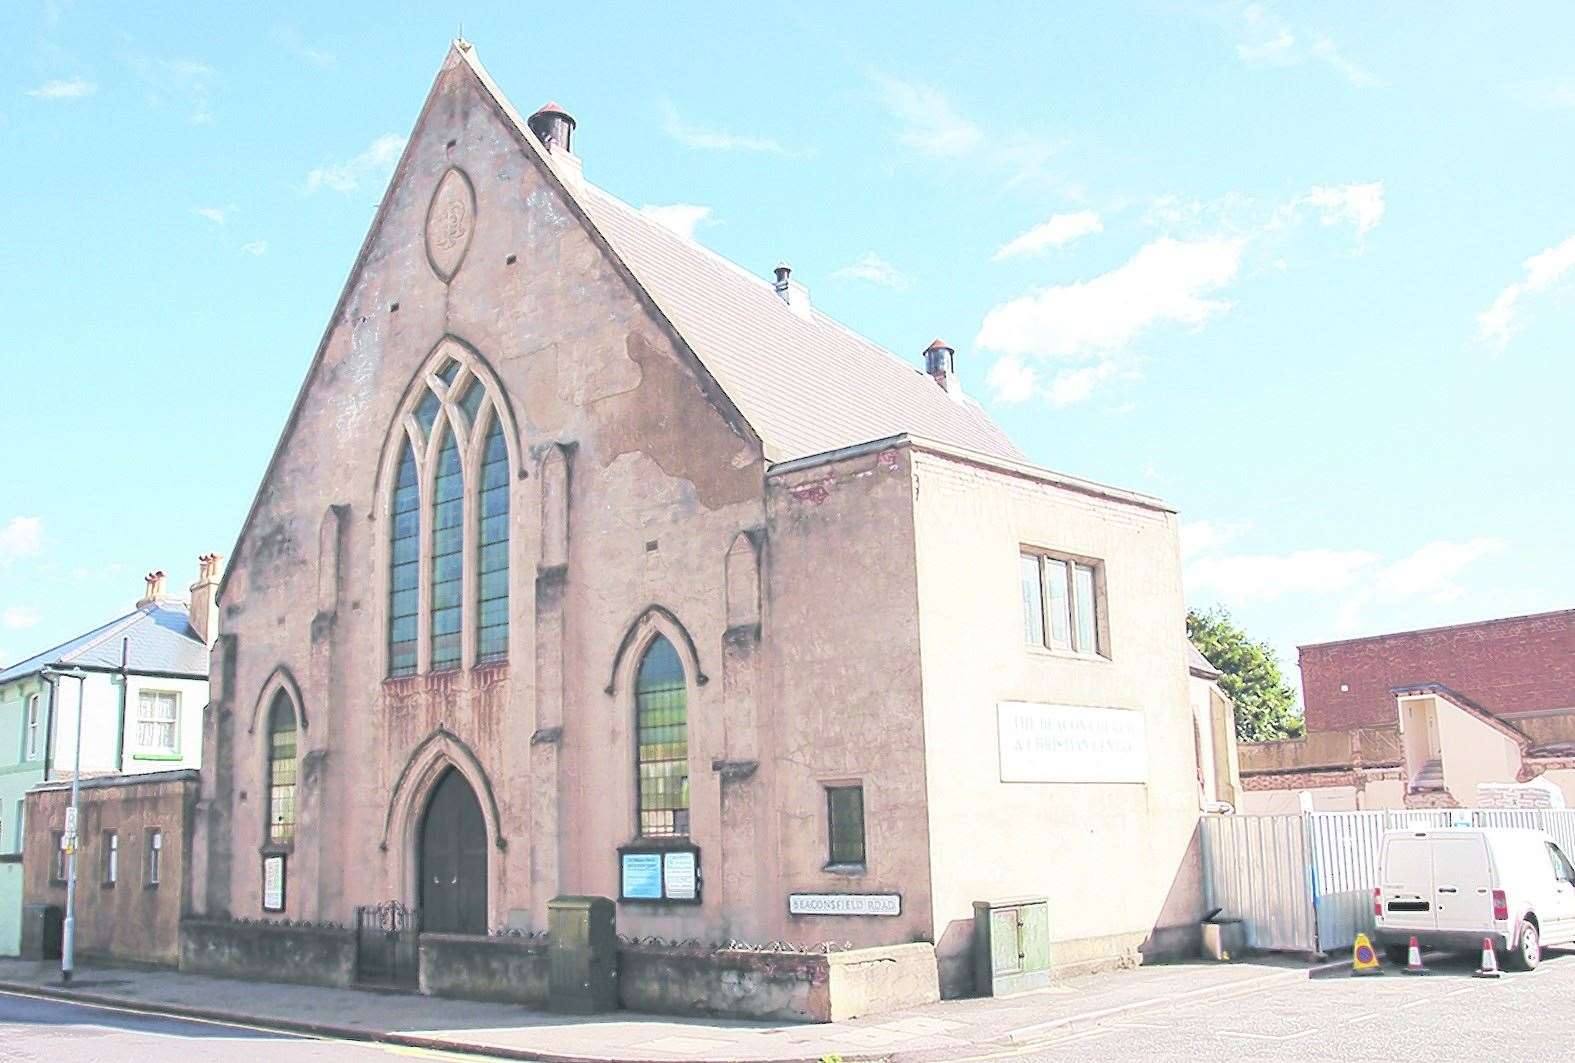 The Beacon Church as it was at the time it went to auction where it was sold for £135,000